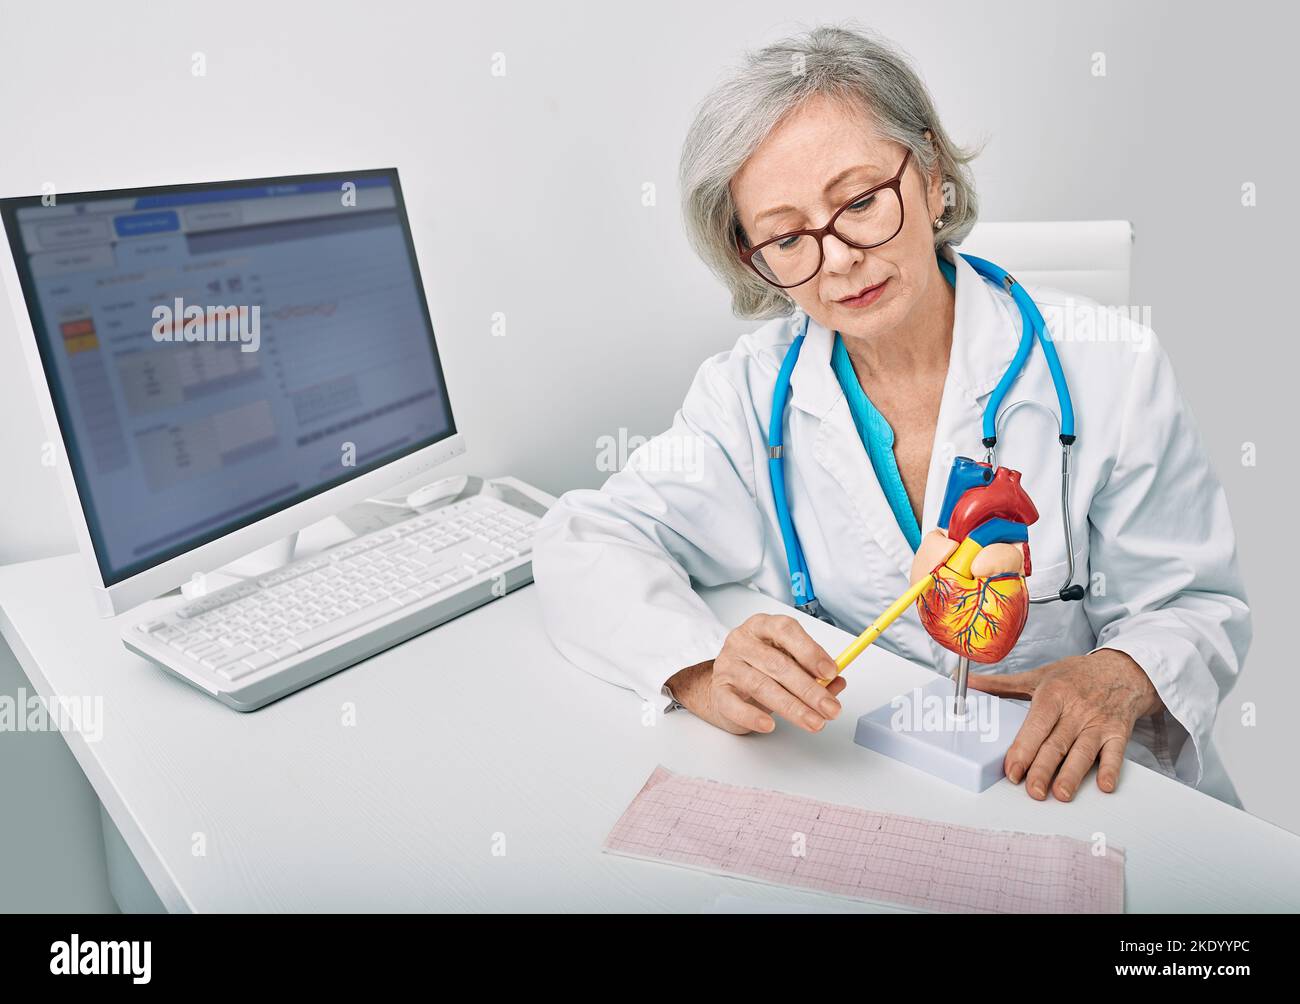 Female cardiologist showing anatomical model of human heart during consultation. Cardiology consultation Stock Photo